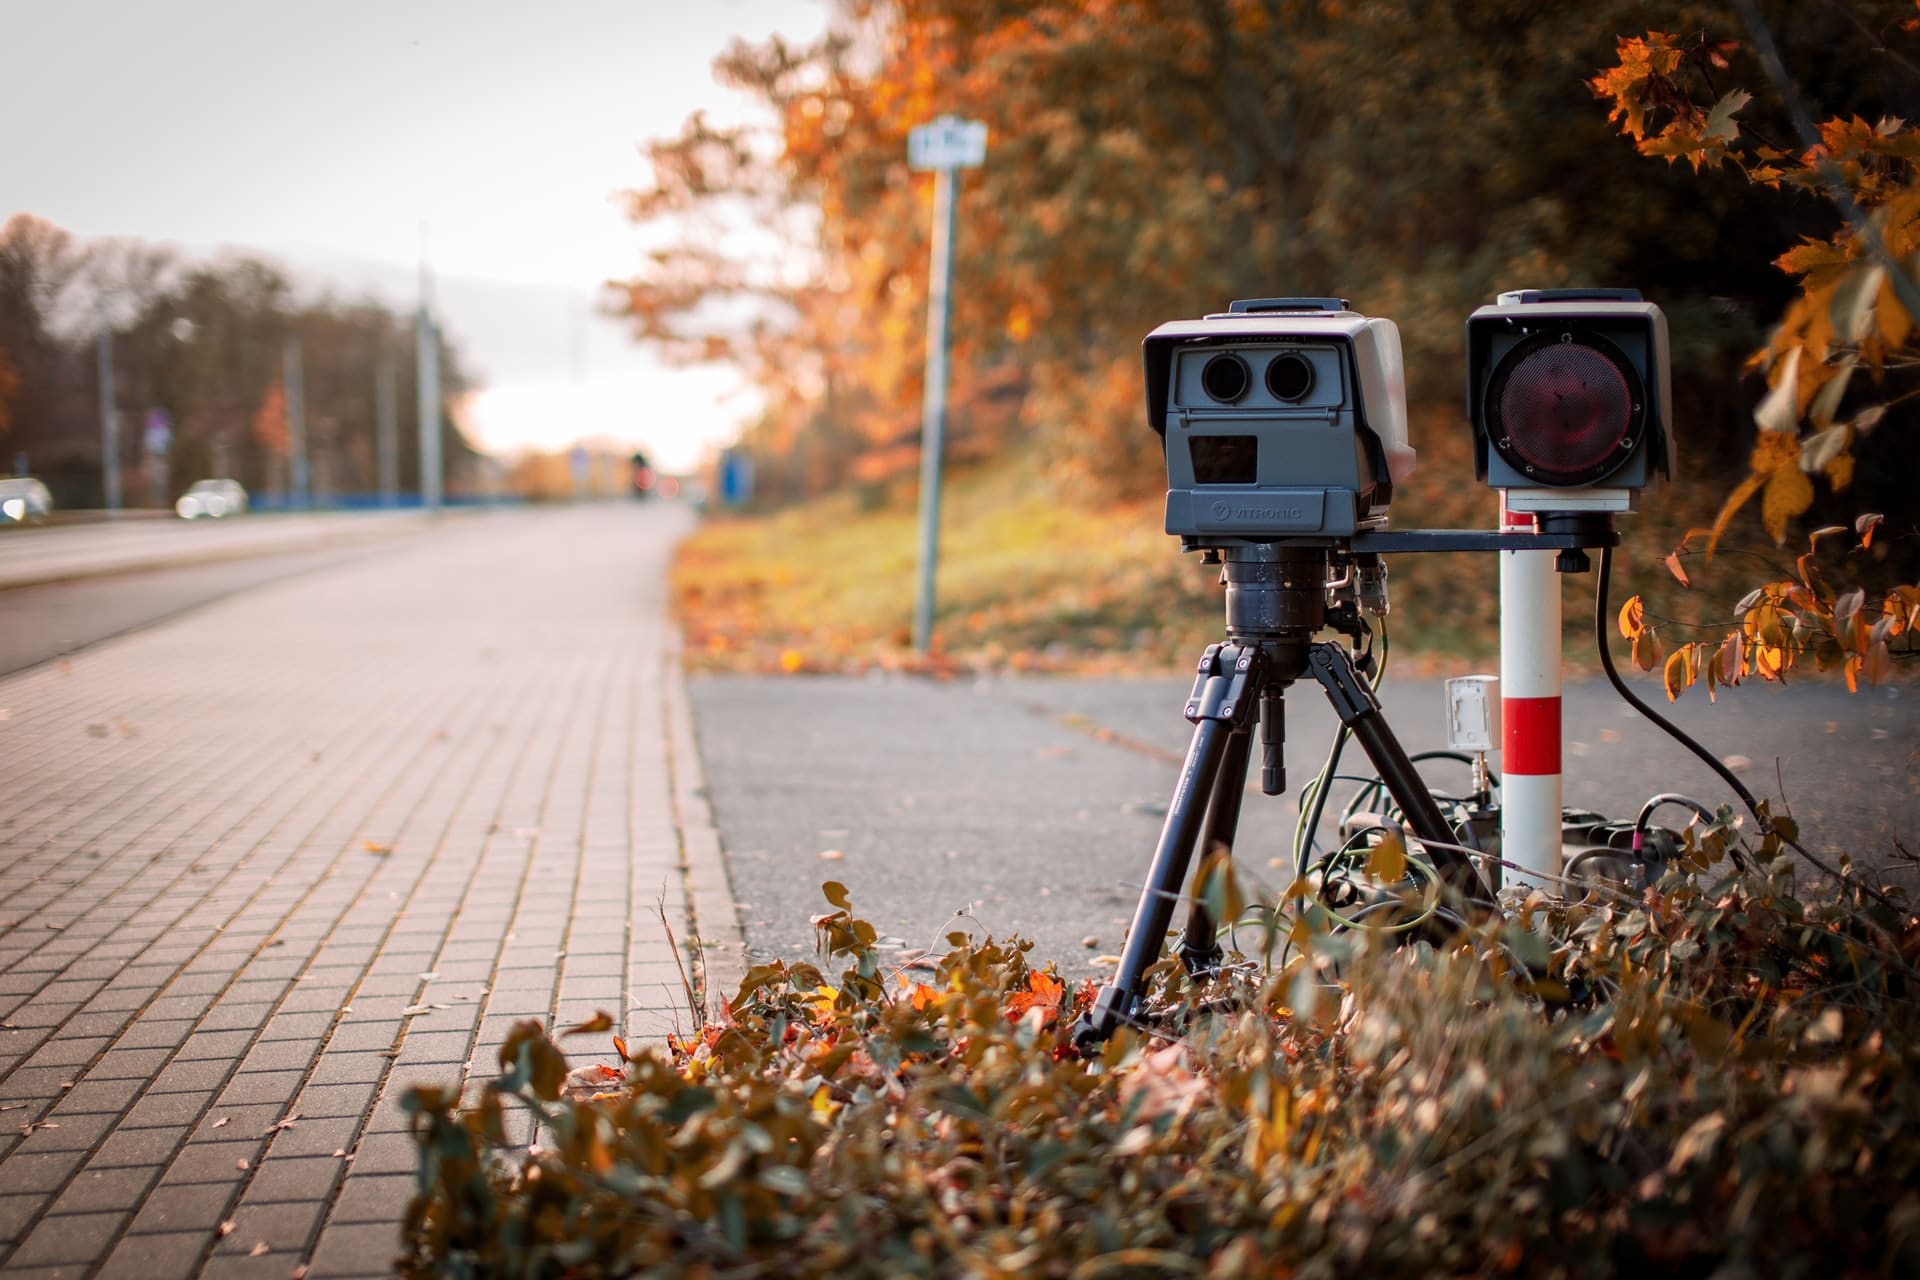 A camera set up to catch speeding drivers representing the increase in dangerous driving during the pandemic